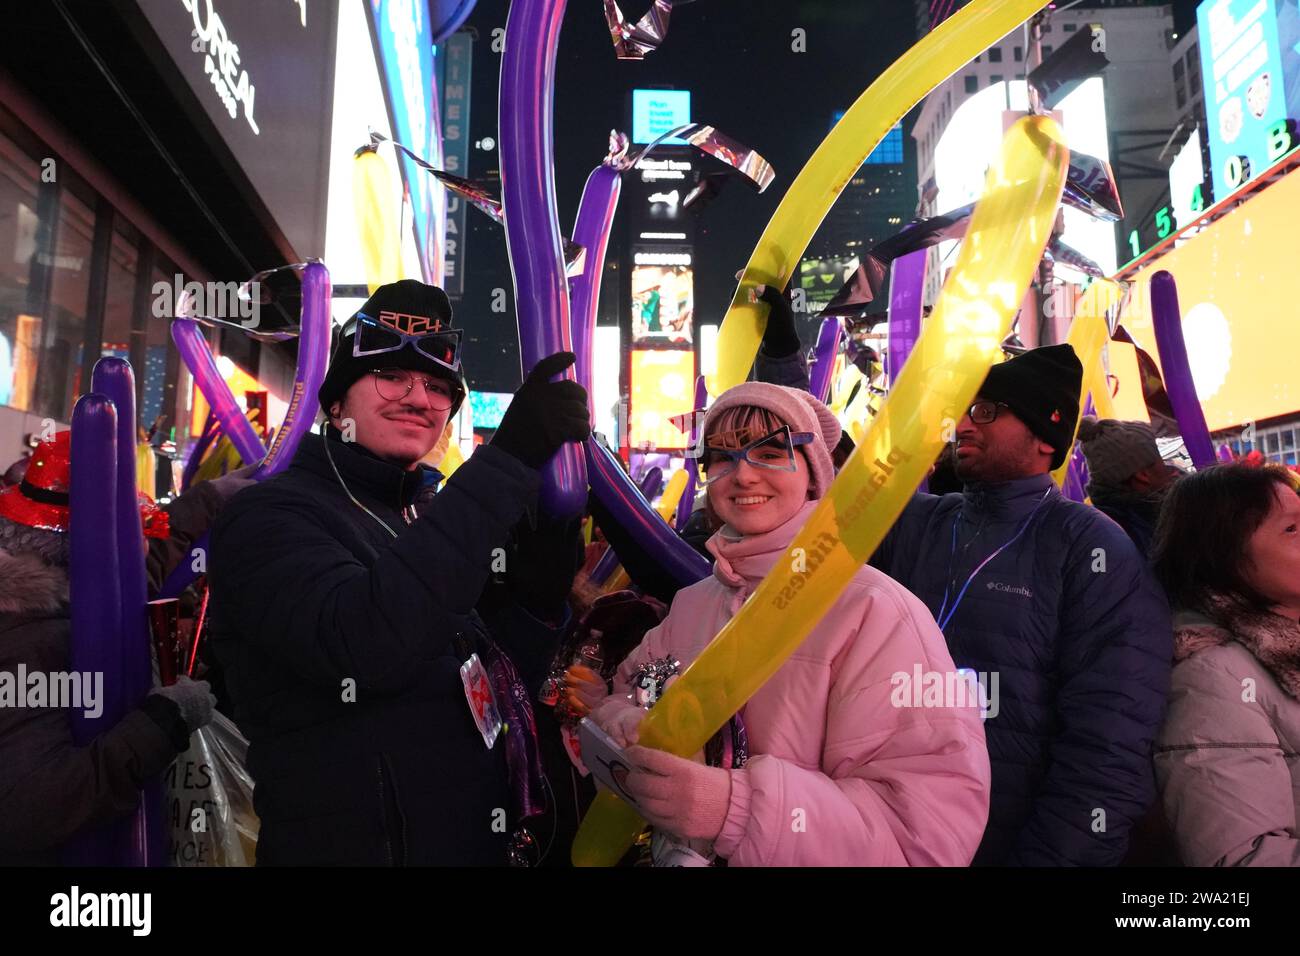 New York United States 30th Dec 2023 Revelers Gather In Times Square To Celebrate The New Year And Watch The Ball Drop Photo By Catherine Nancesopa Imagessipa Usa Credit Sipa Usaalamy Live News 2WA21EJ 